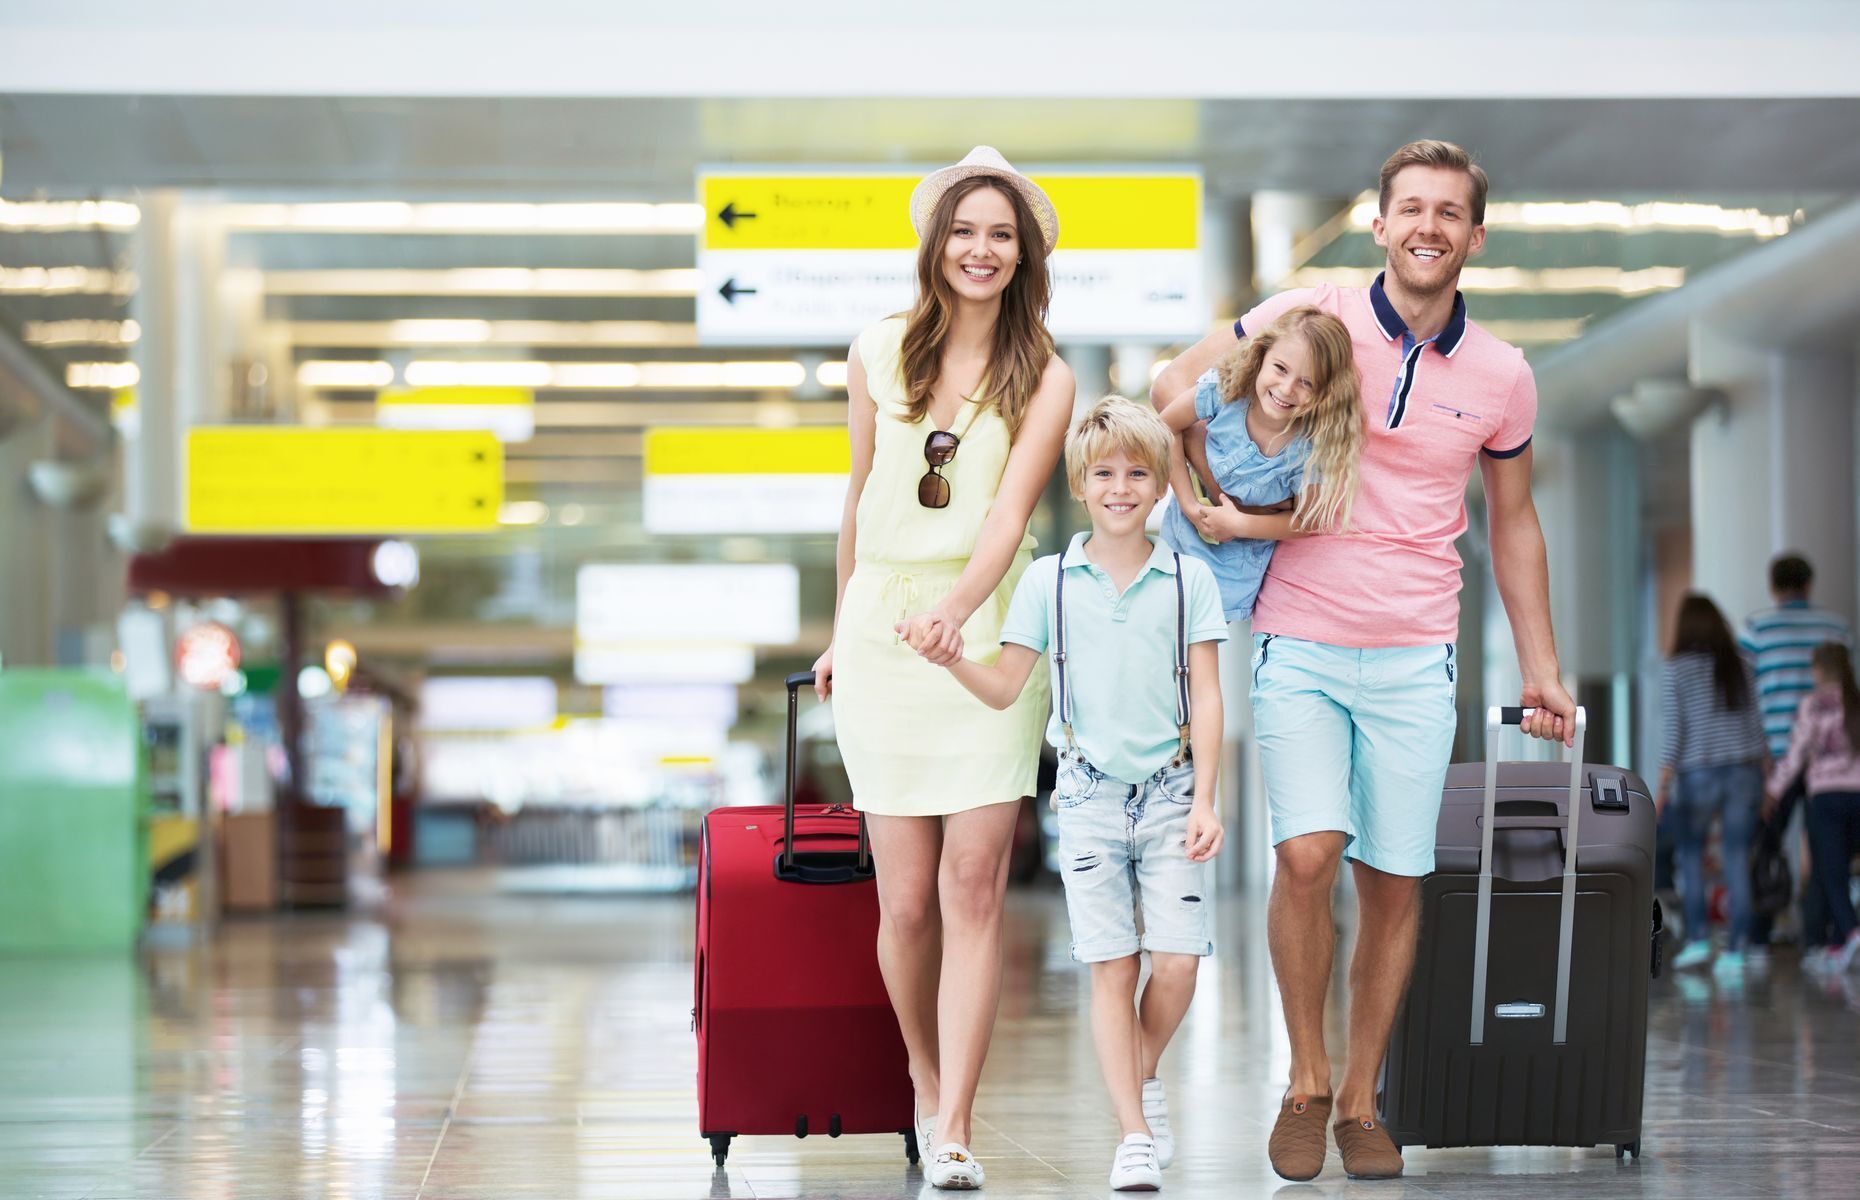 <p>If you like to travel, keep in mind that children add considerable expenses to those fun weekend getaways or dream vacations. Fortunately, there is plenty of advice out there from parents who have <a href="https://theglobalwizards.com/family-travel-on-a-budget-the-ultimate-guide-to-travel-with-kids-on-a-budget/">experience planning budget-friendly trips</a>. <a href="https://www.gobankingrates.com/saving-money/travel/extra-travel-costs-when-traveling-with-kids/">Factors to consider</a> when you’re breaking down travel costs include purchasing or renting travel gear for kids, finding child-friendly hotels, renting vehicles and paying airline fees, such as additional seats for non-infant children and extra bags. </p>